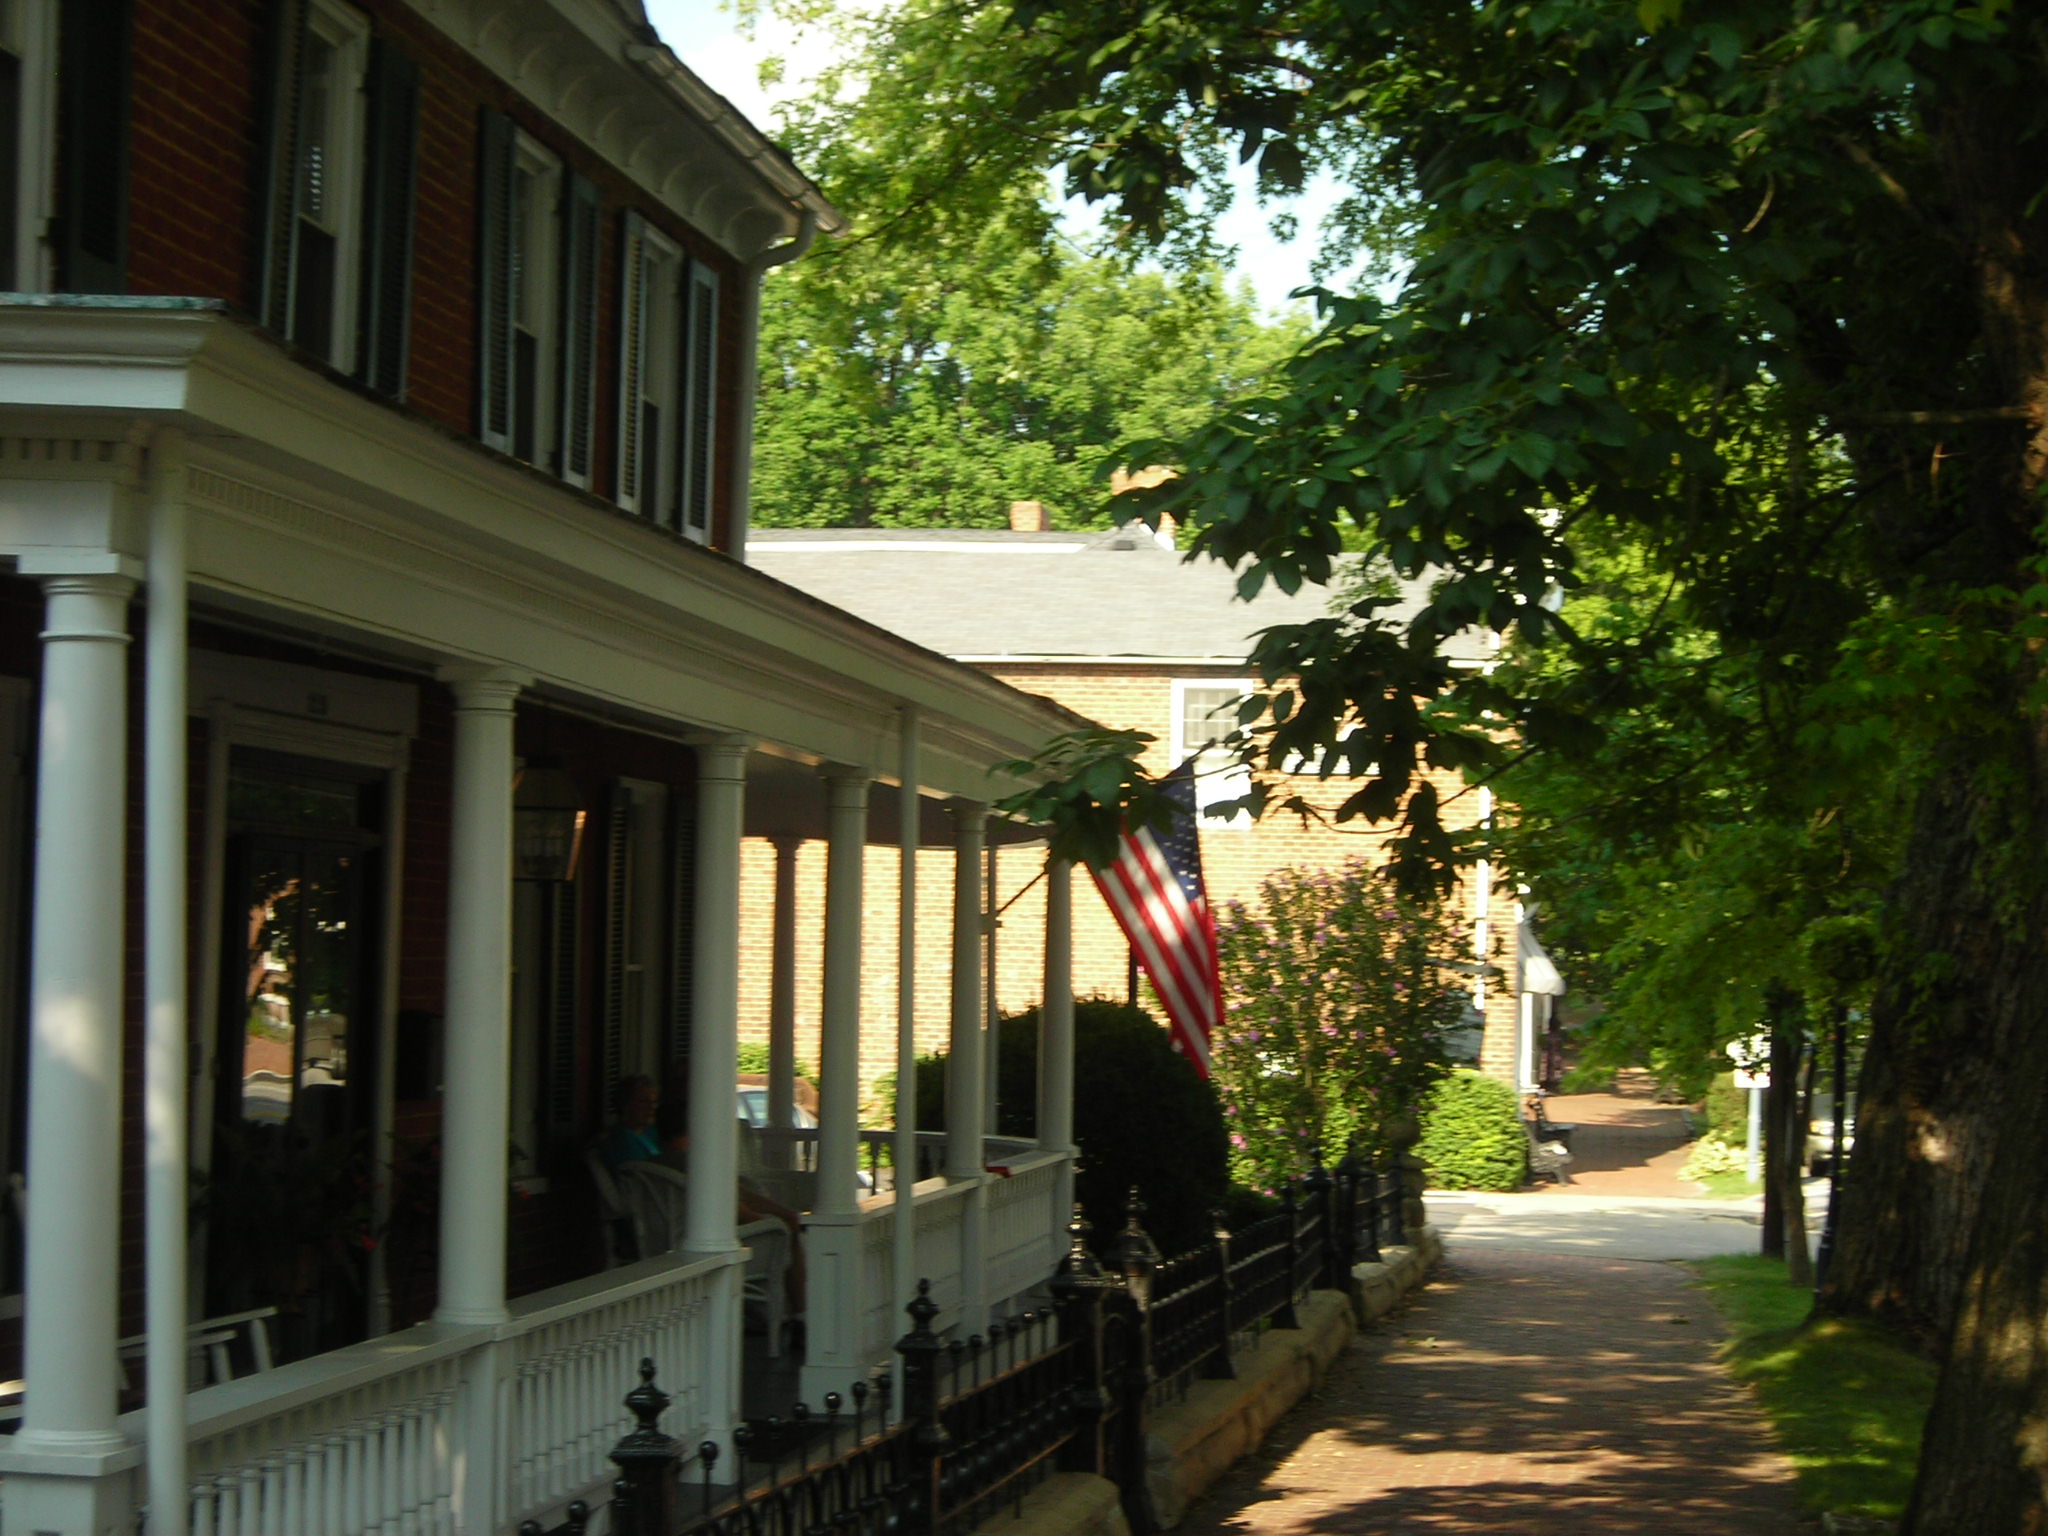 the front entrance to a colonial house and american flag in the window